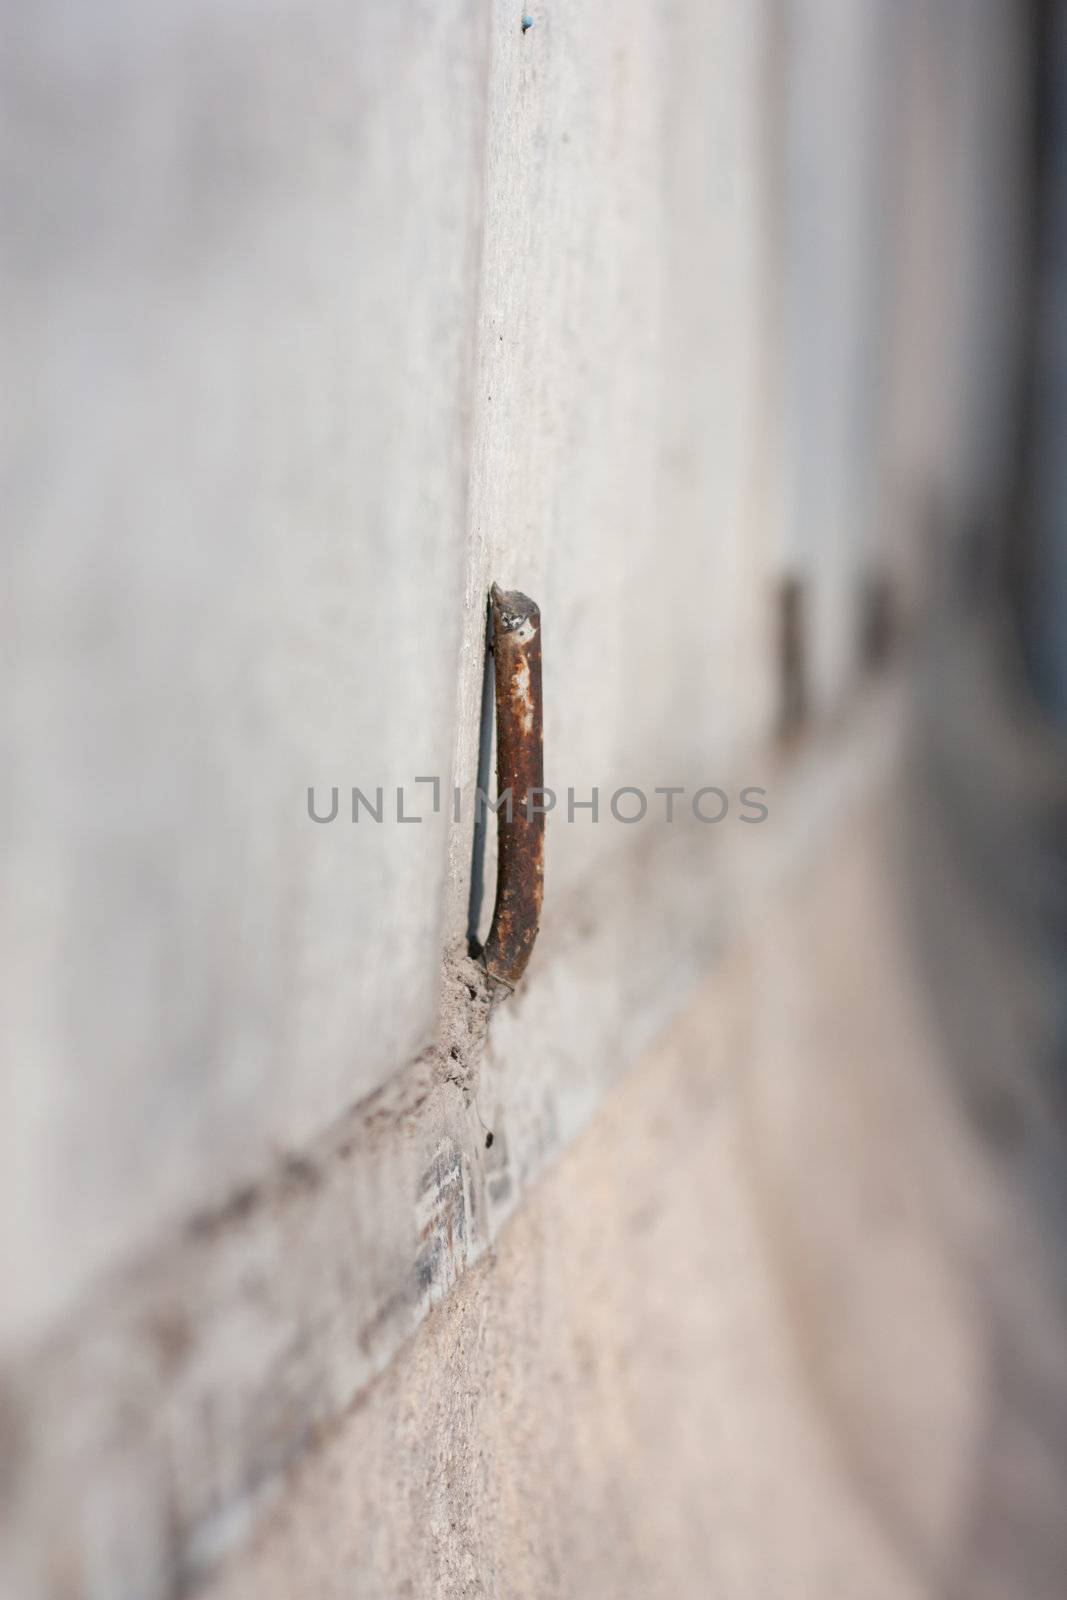 rusty pin on the concrete wall